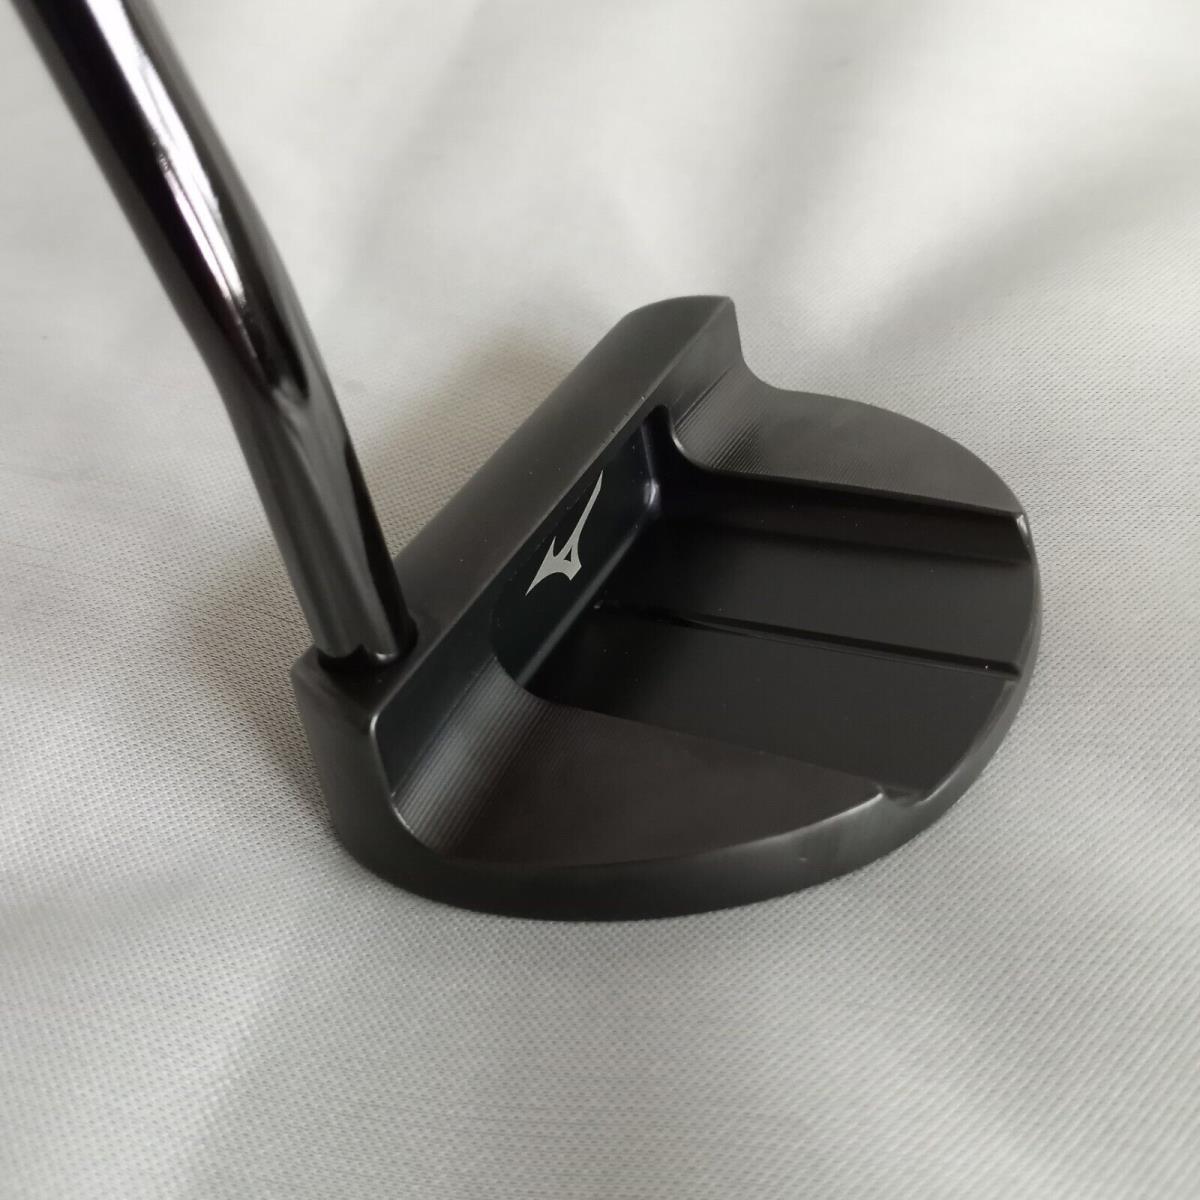 Mizuno M Craft Omoi Type 3 Putter Intense Black Finish 34 In with Head Cover